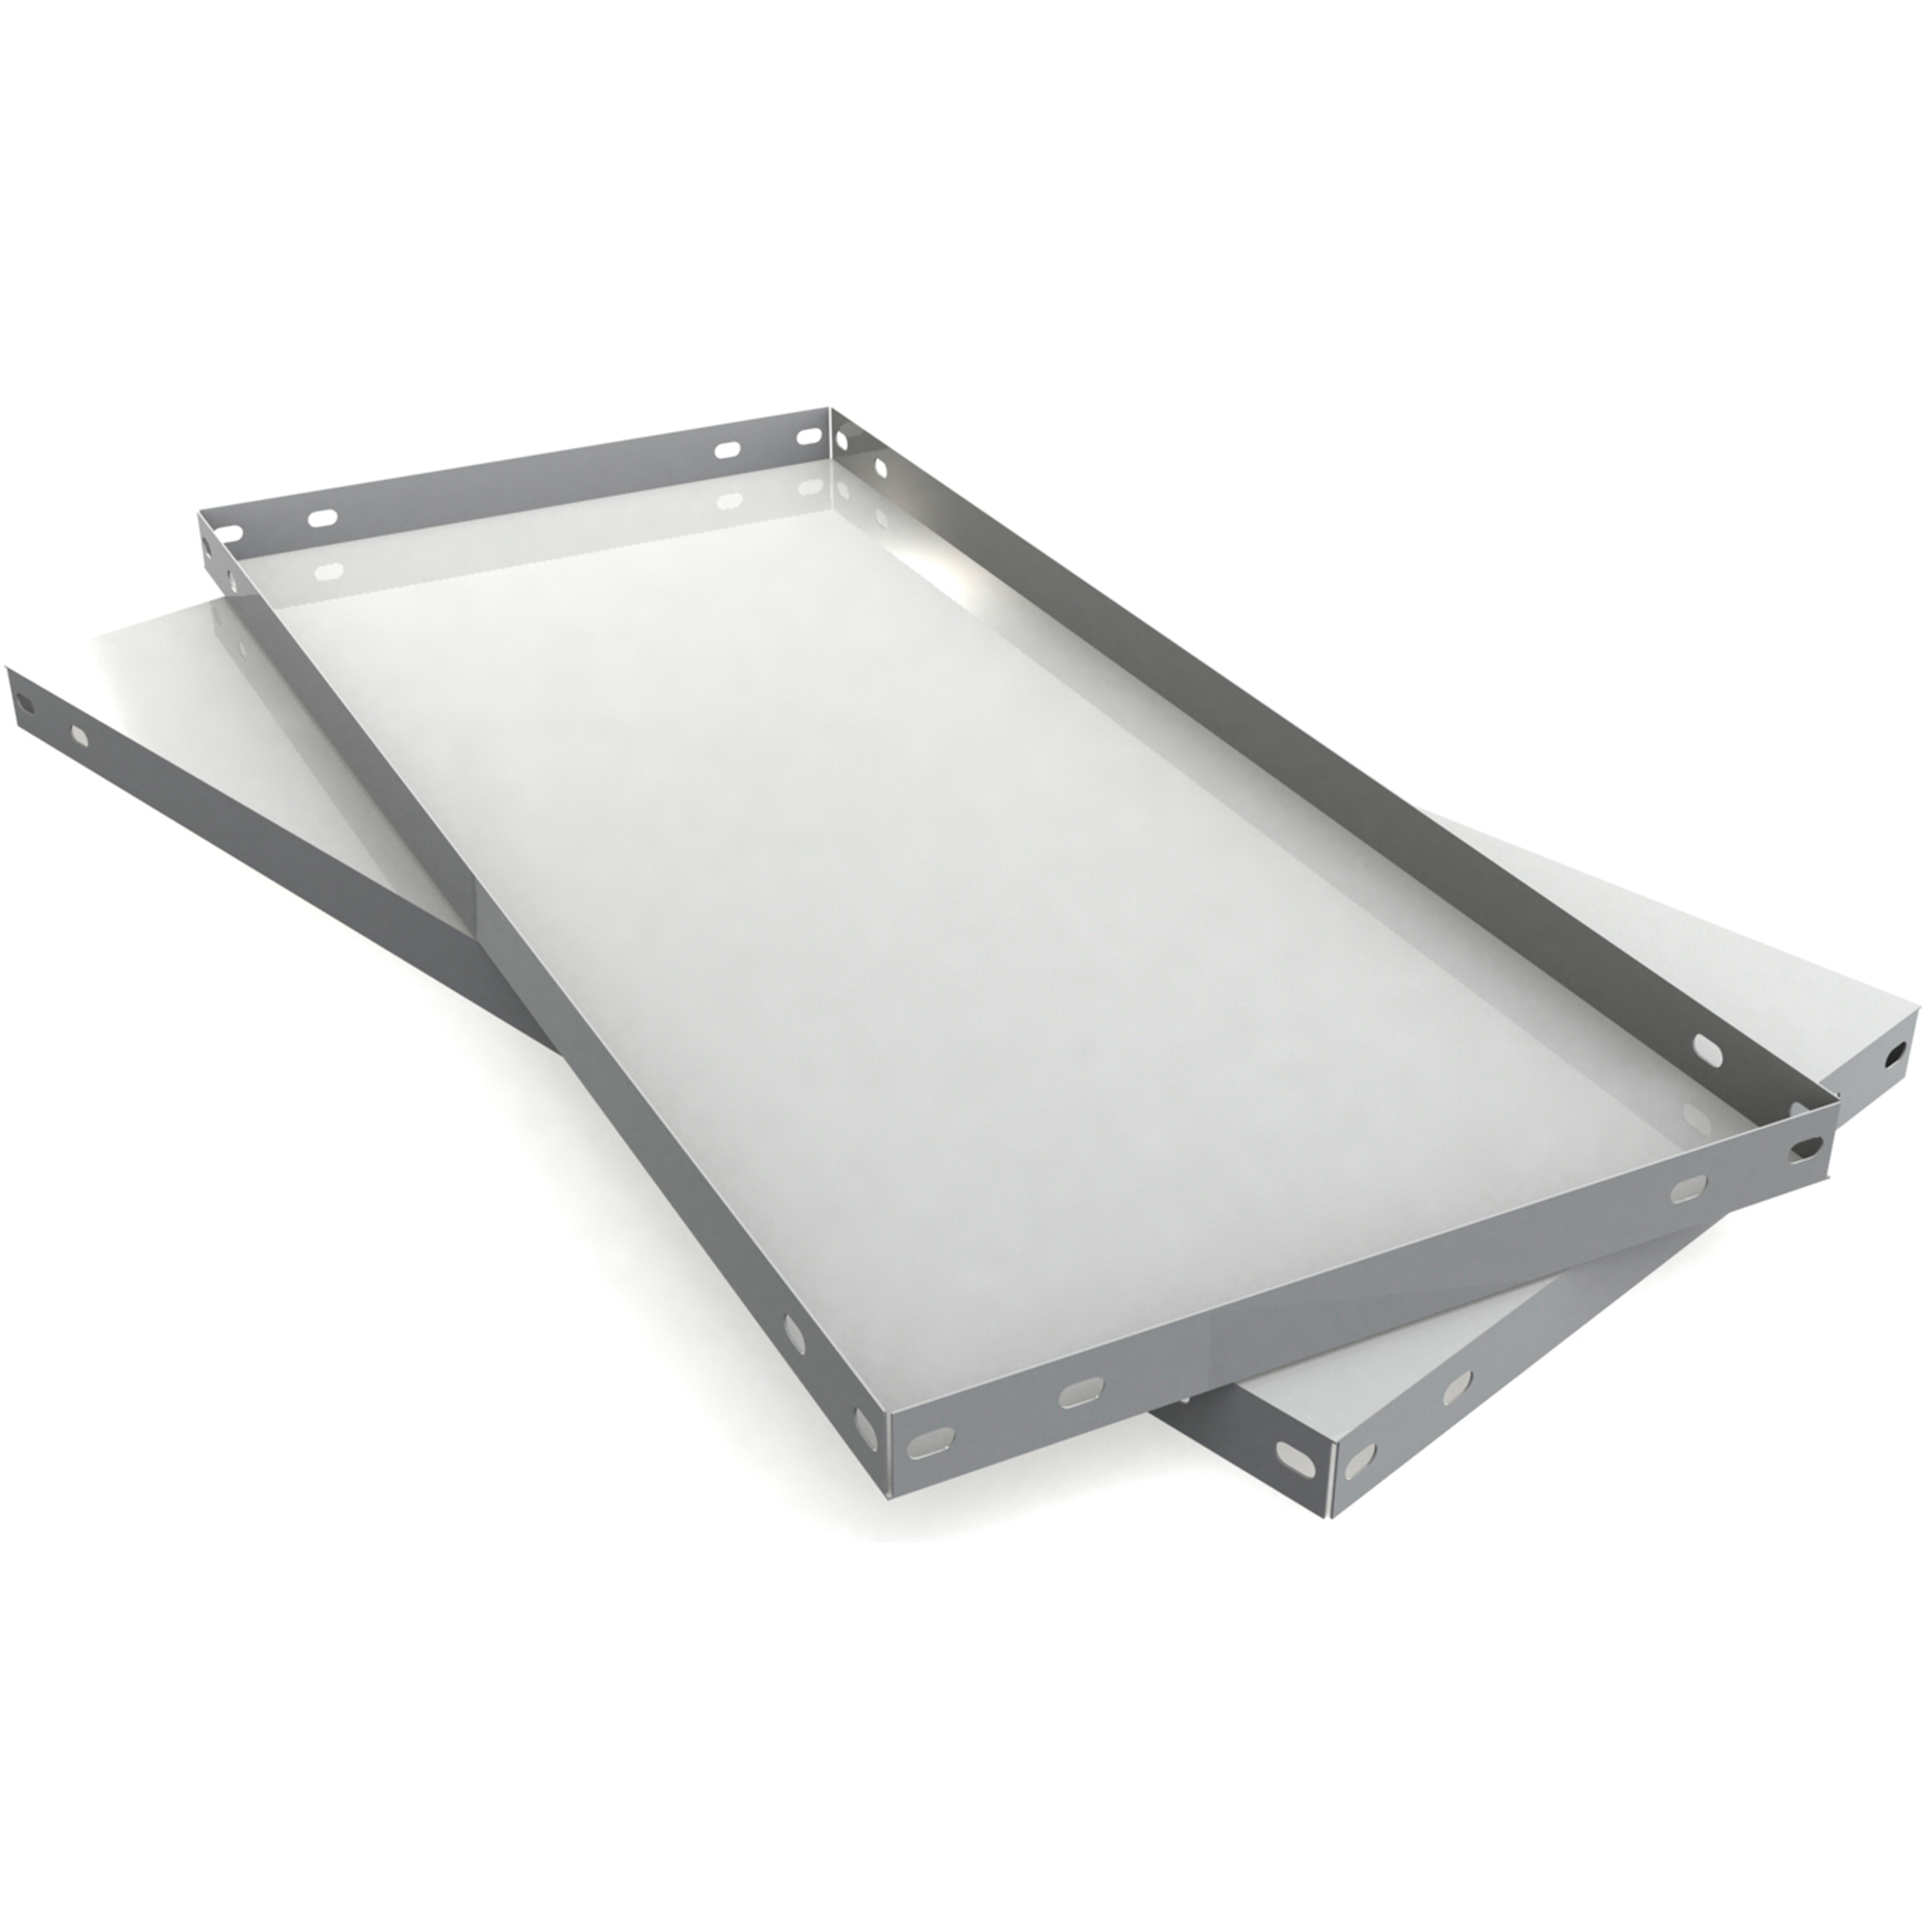 TRAY 900X200 ANTHRACITE